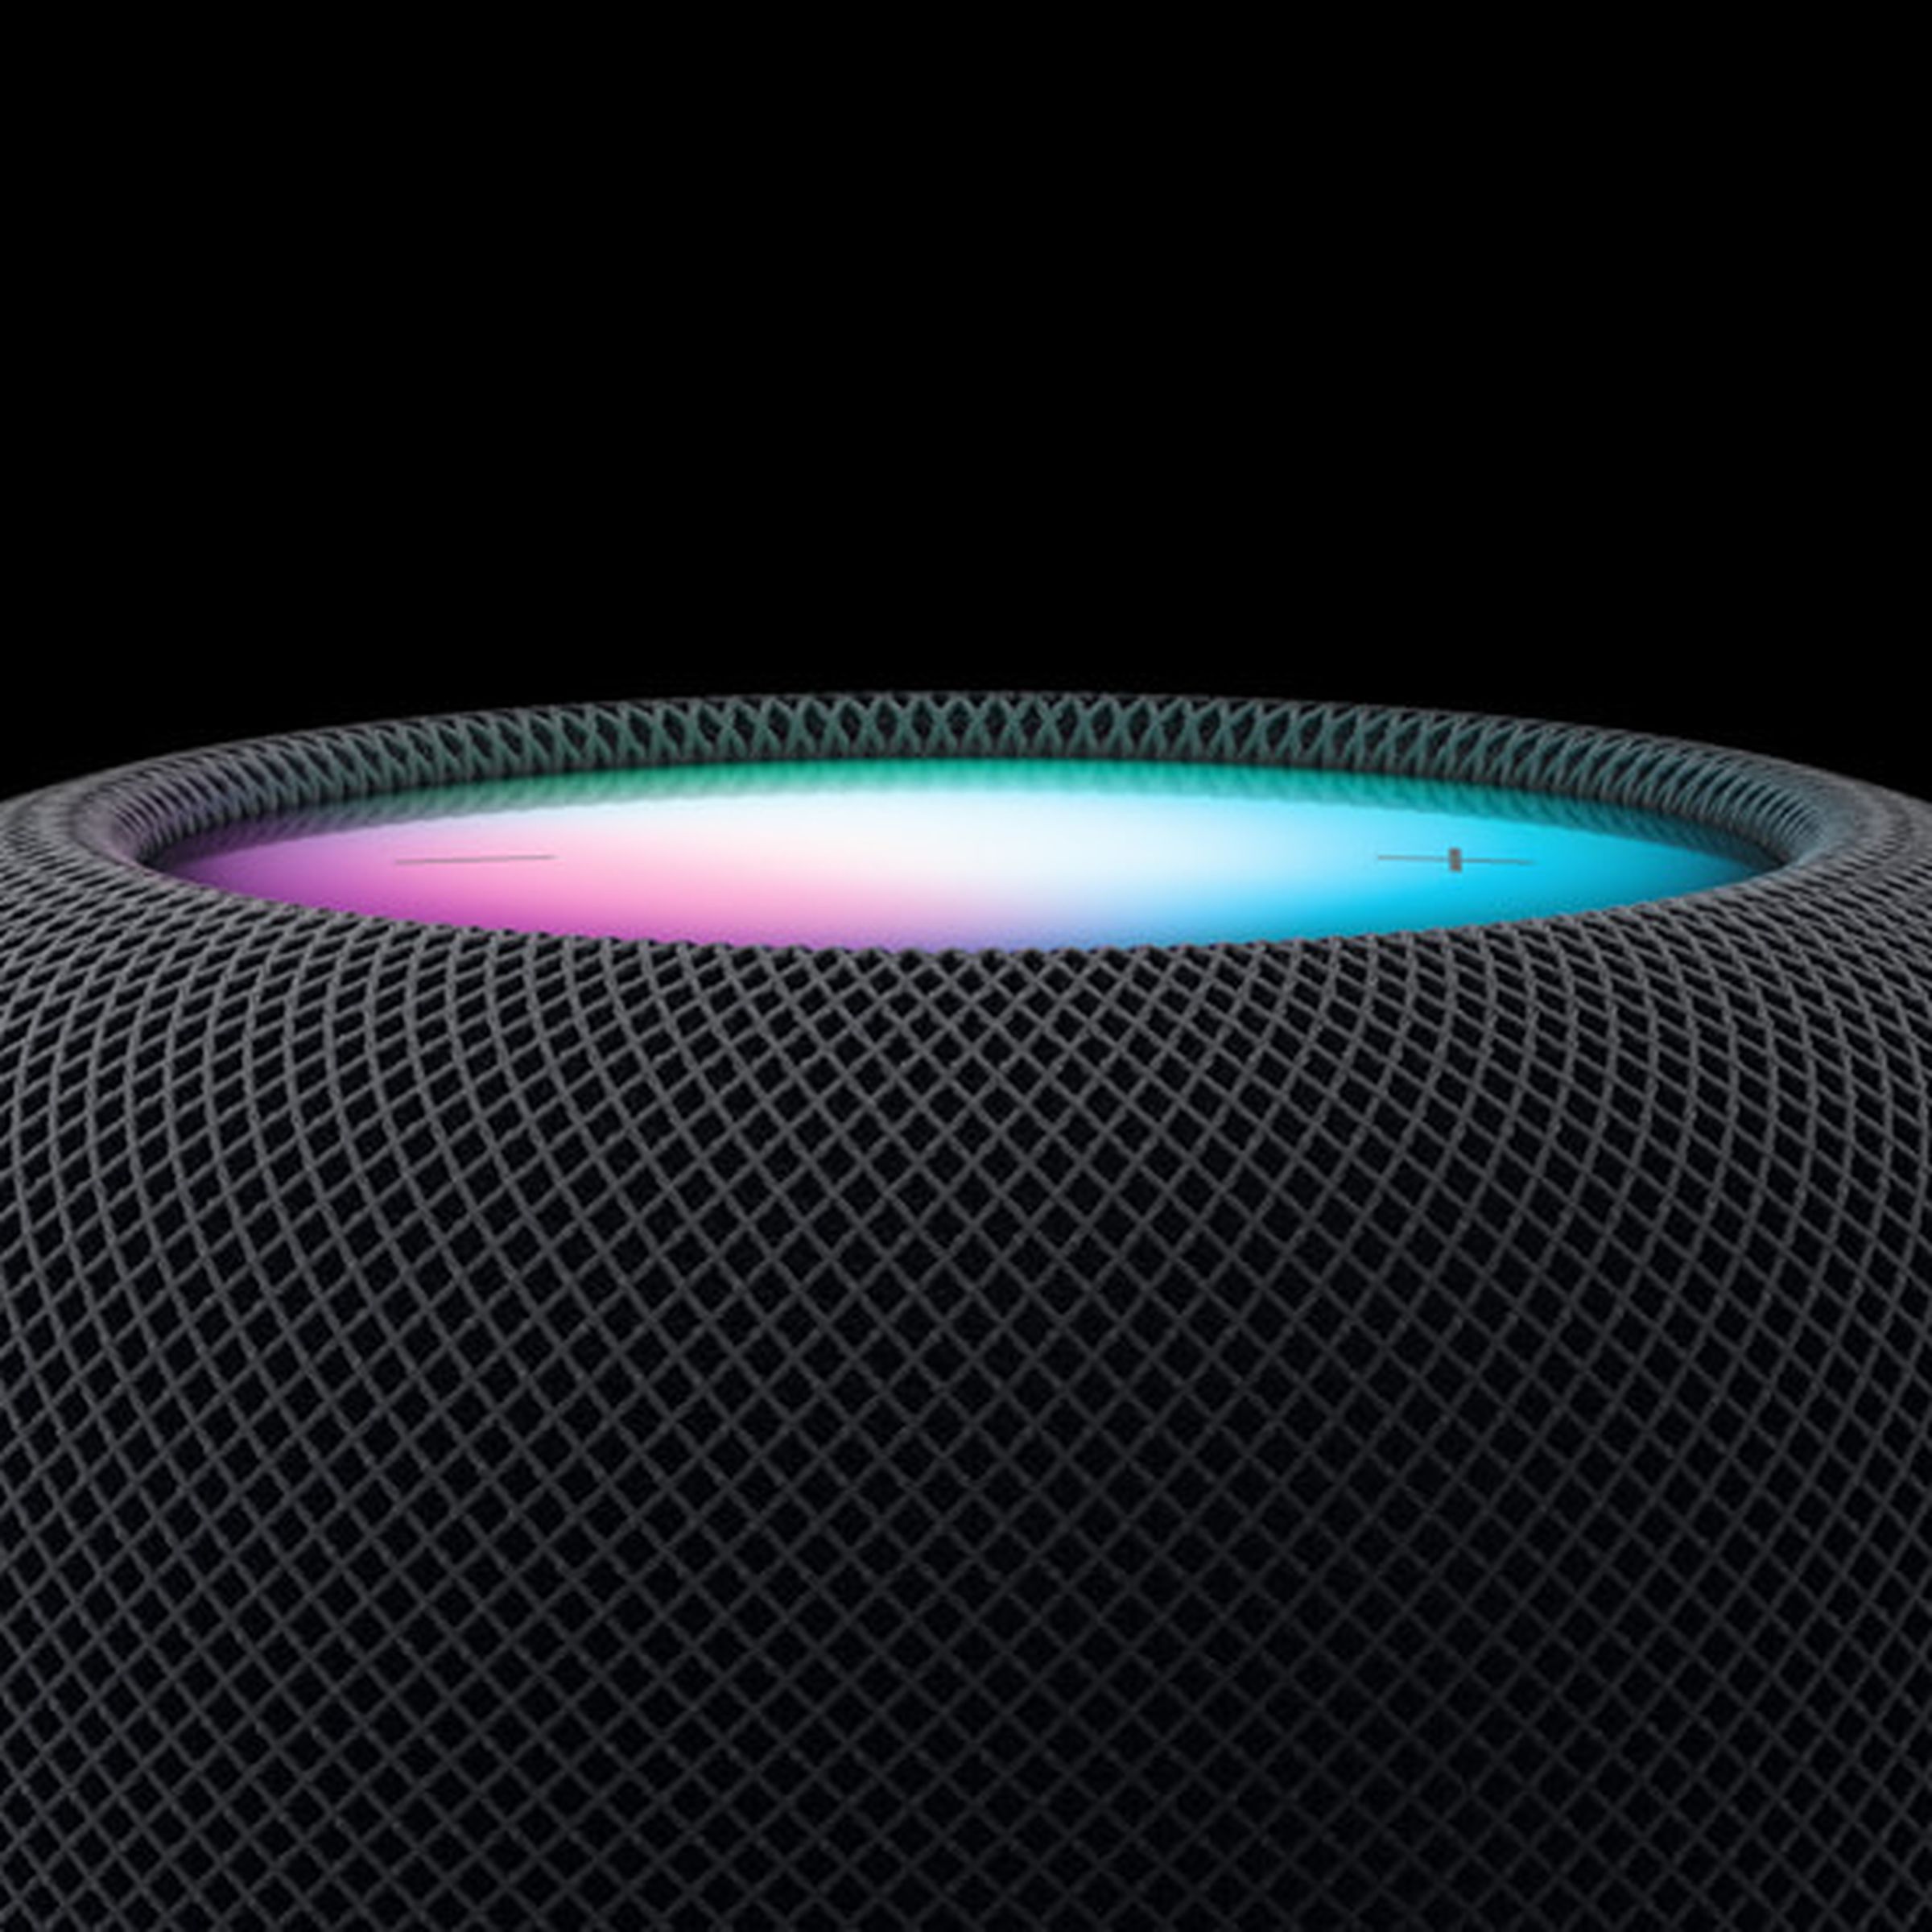 A stock photo of the new HomePod